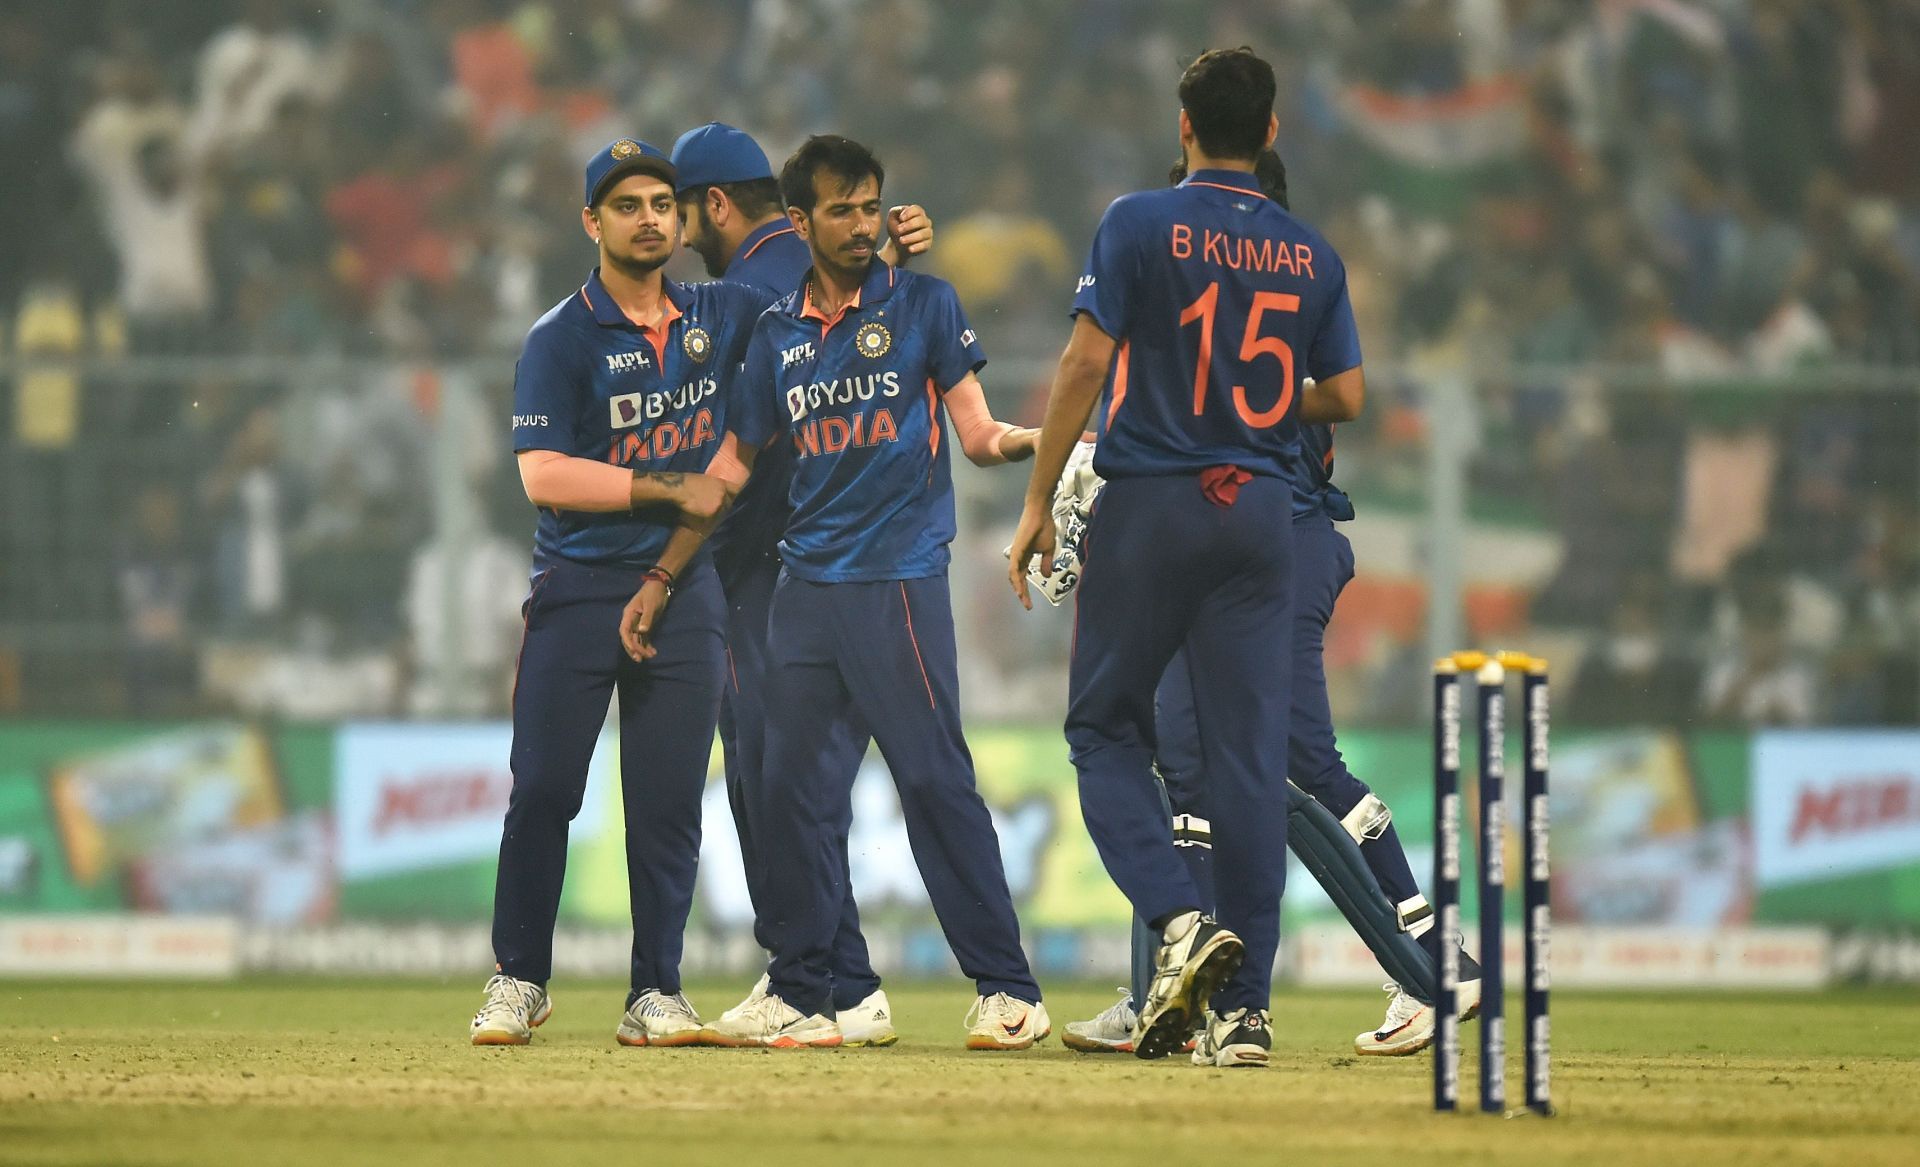 Yuzvendra Chahal celebrates a wicket during the 3rd T20I against New Zealand. Pic: Getty Images